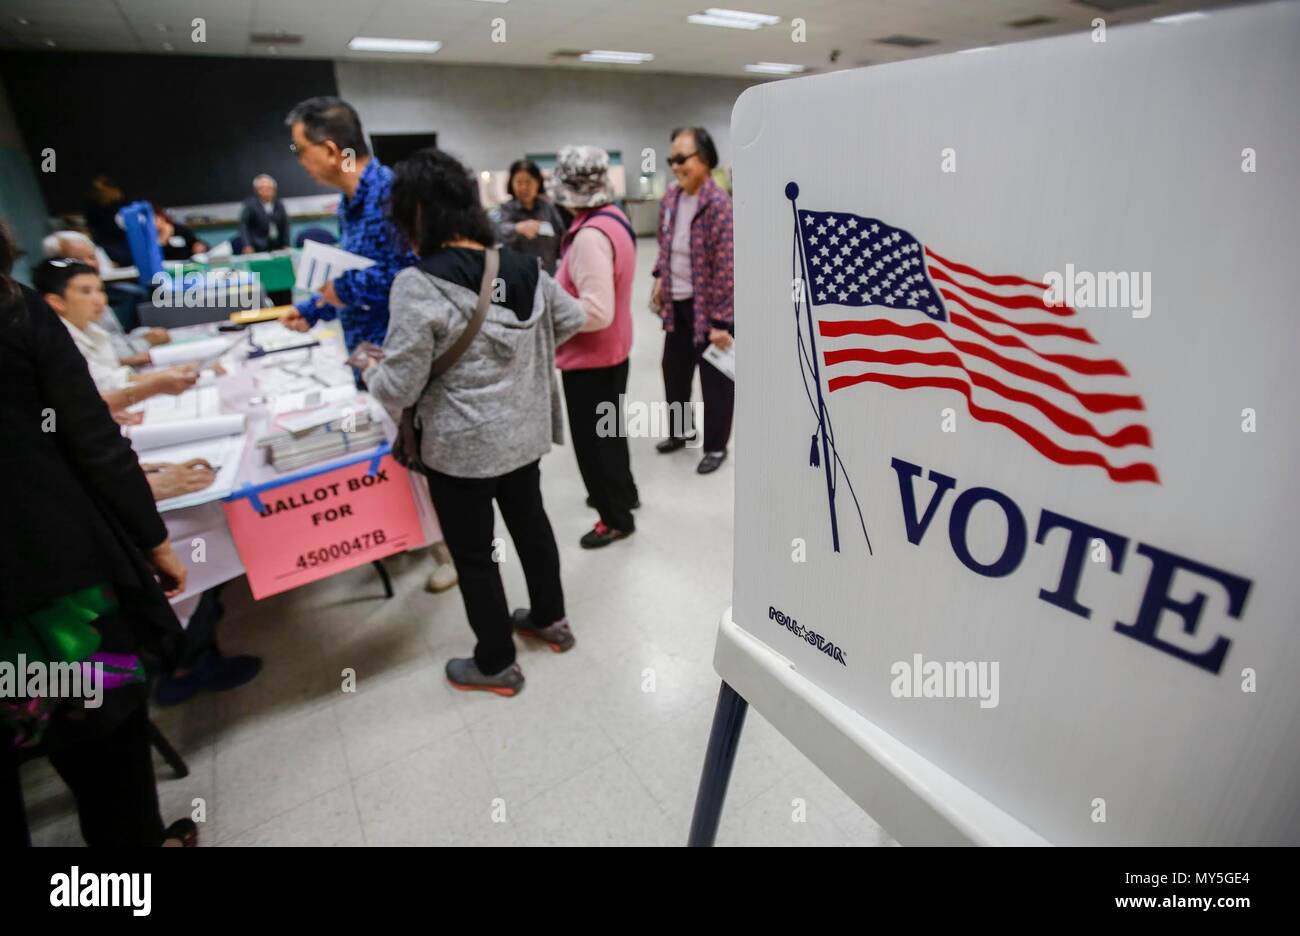 (180606) -- LOS ANGELES, June 6, 2018 (Xinhua) -- Voters are seen at a polling station during California primary election in Monterey Park, Los Angeles, the United States, June 5, 2018. (Xinhua/Zhao Hanrong) (jmmn) Stock Photo